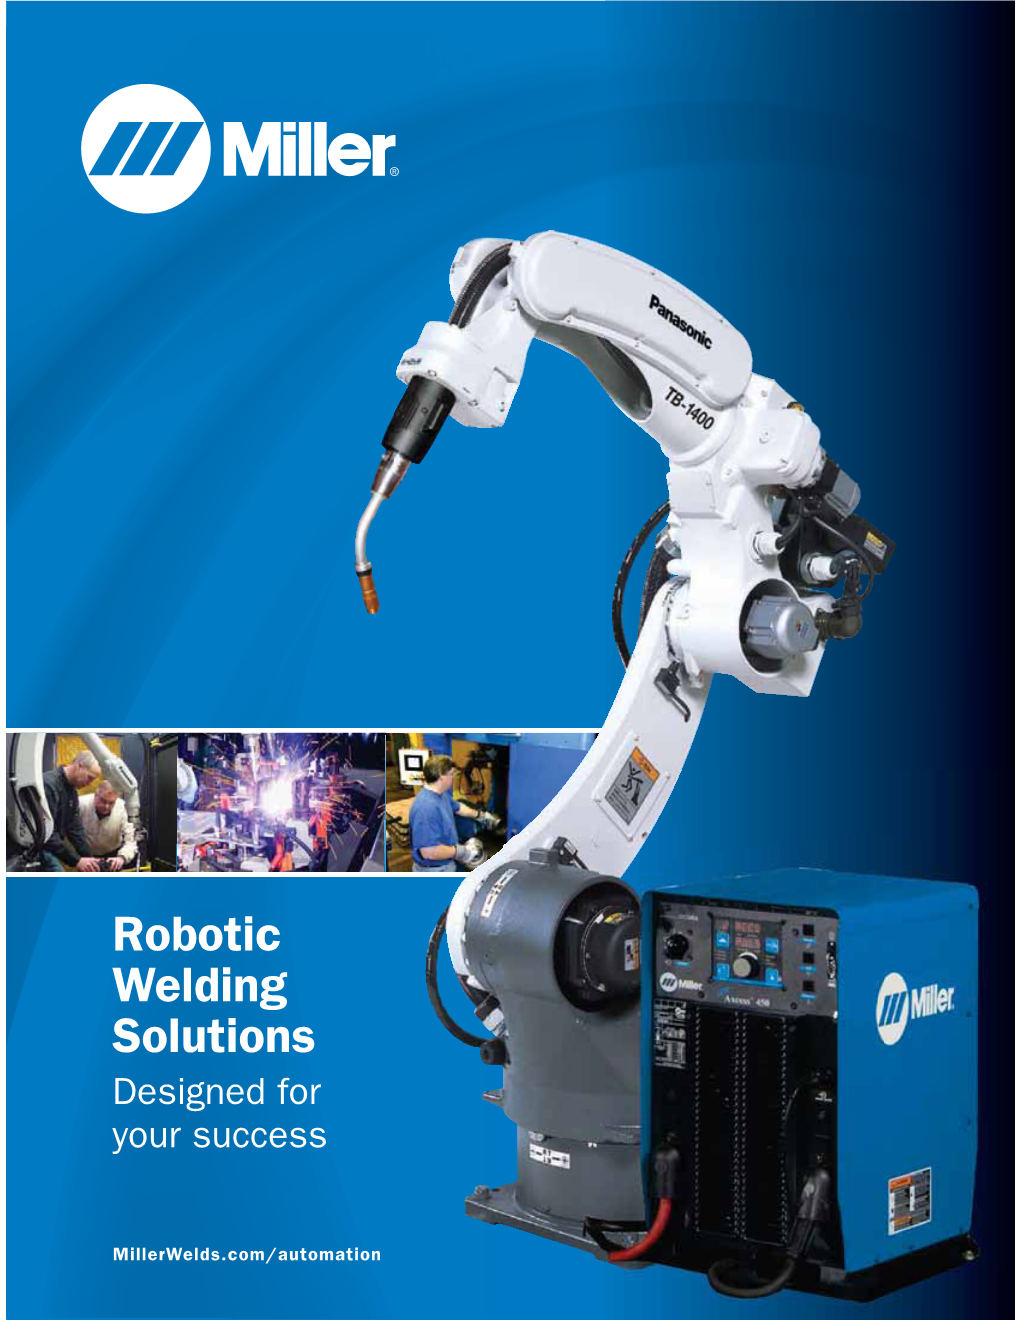 Robotic Welding Solutions Designed for Your Success